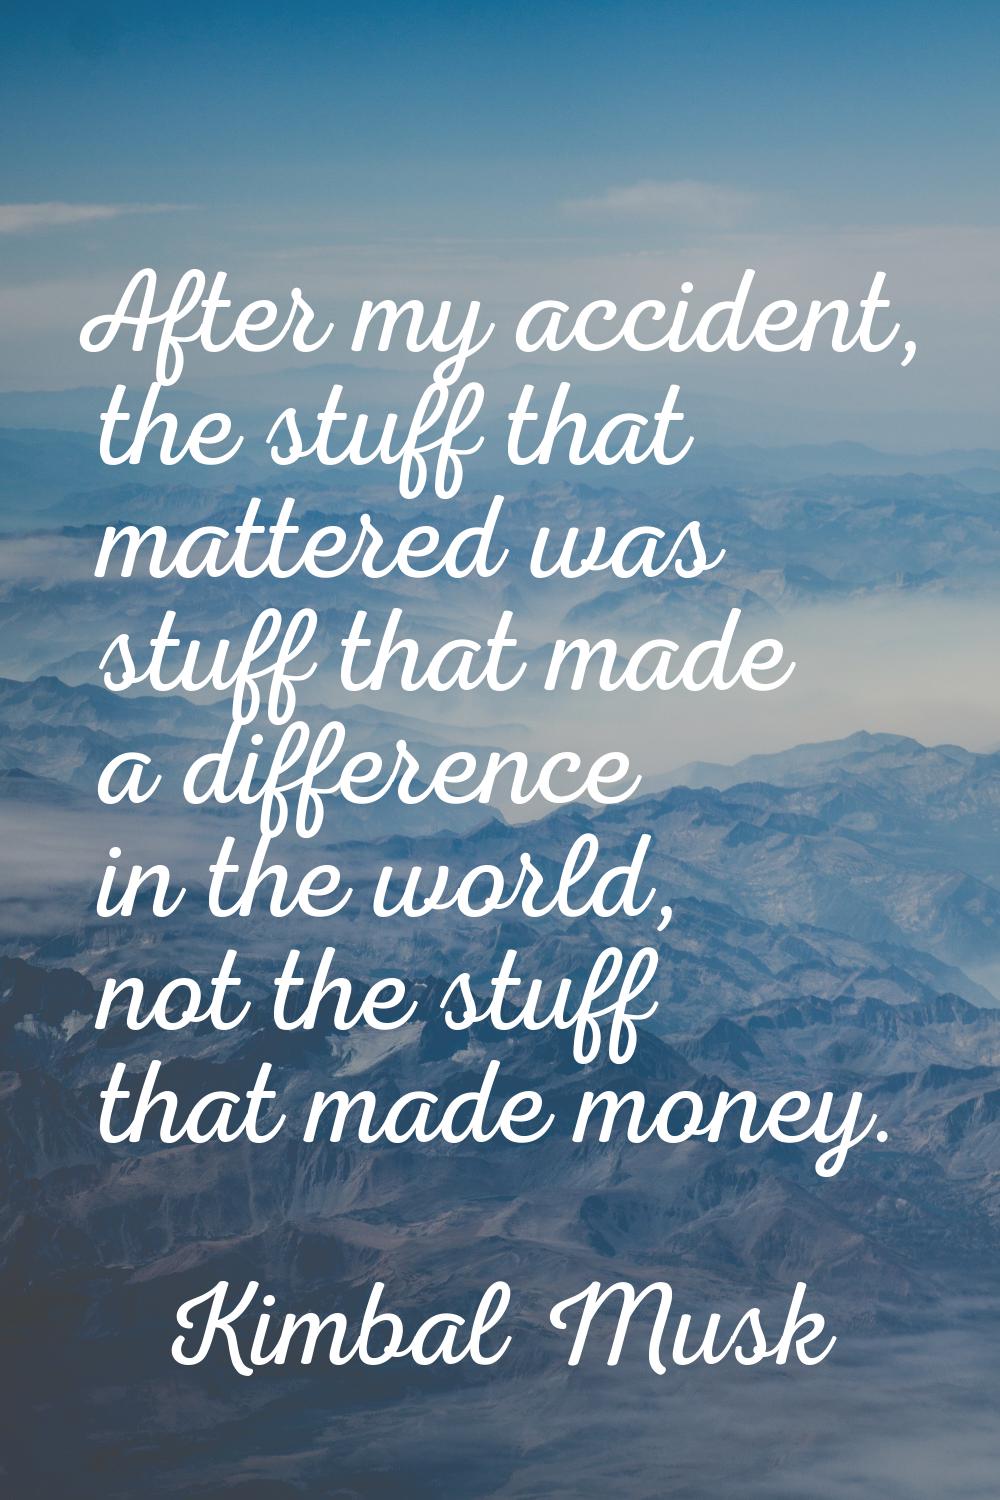 After my accident, the stuff that mattered was stuff that made a difference in the world, not the s